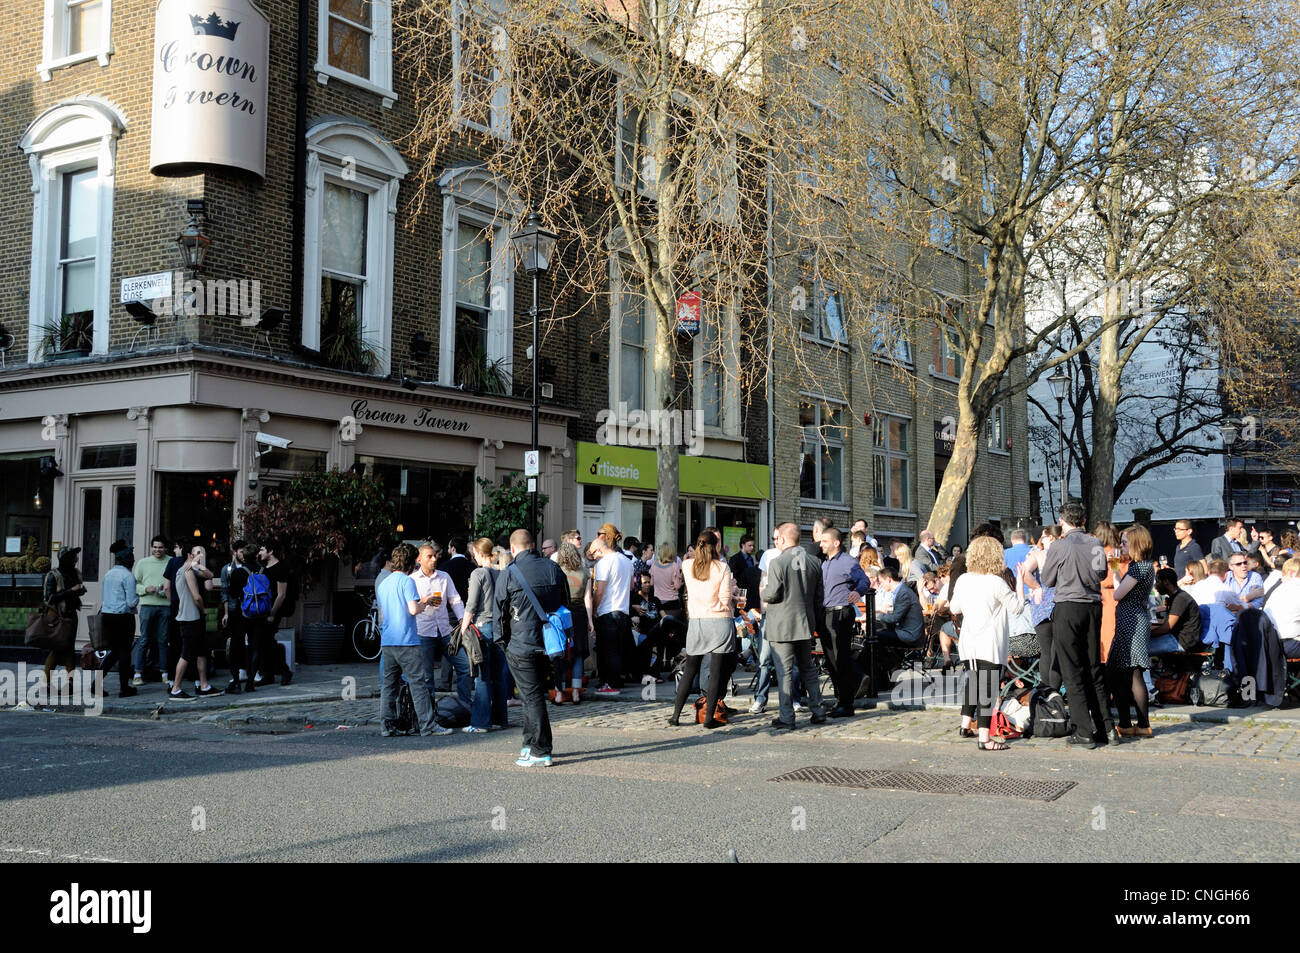 People outside the Crown Tavern a city pub in Clerkenwell, London Borough of Islington, England UK Stock Photo